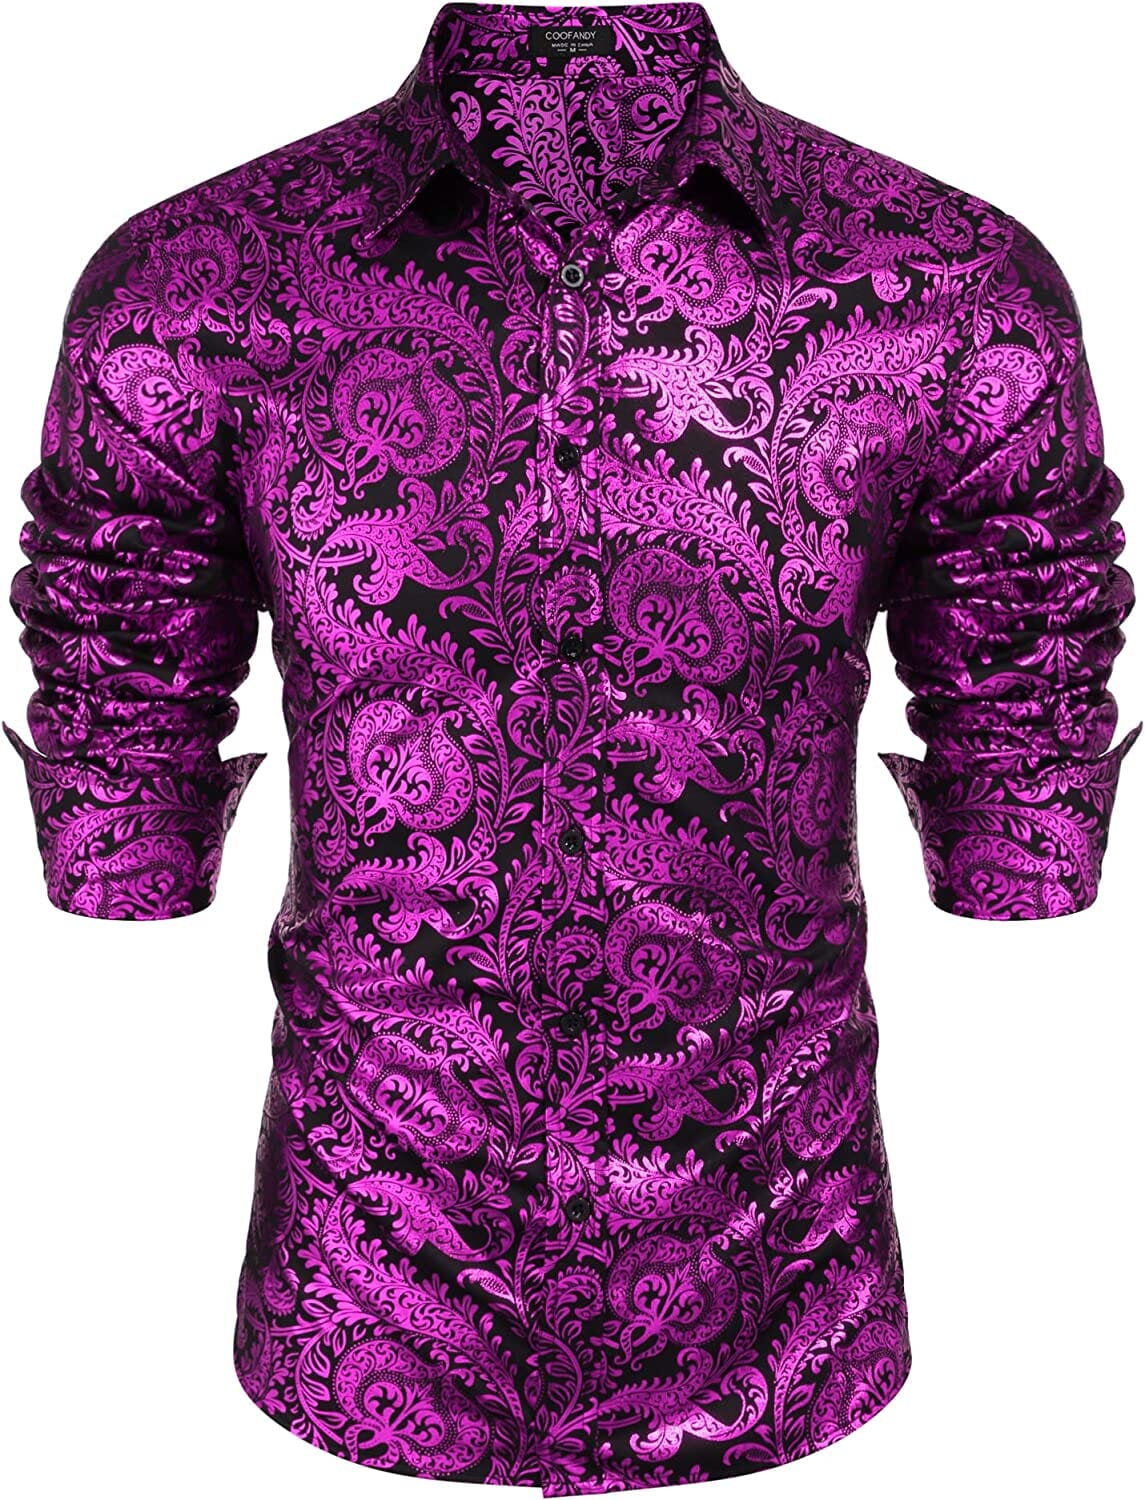 Luxury Design Floral Dress Shirt (US Only) Shirts COOFANDY Store Pat9 S 